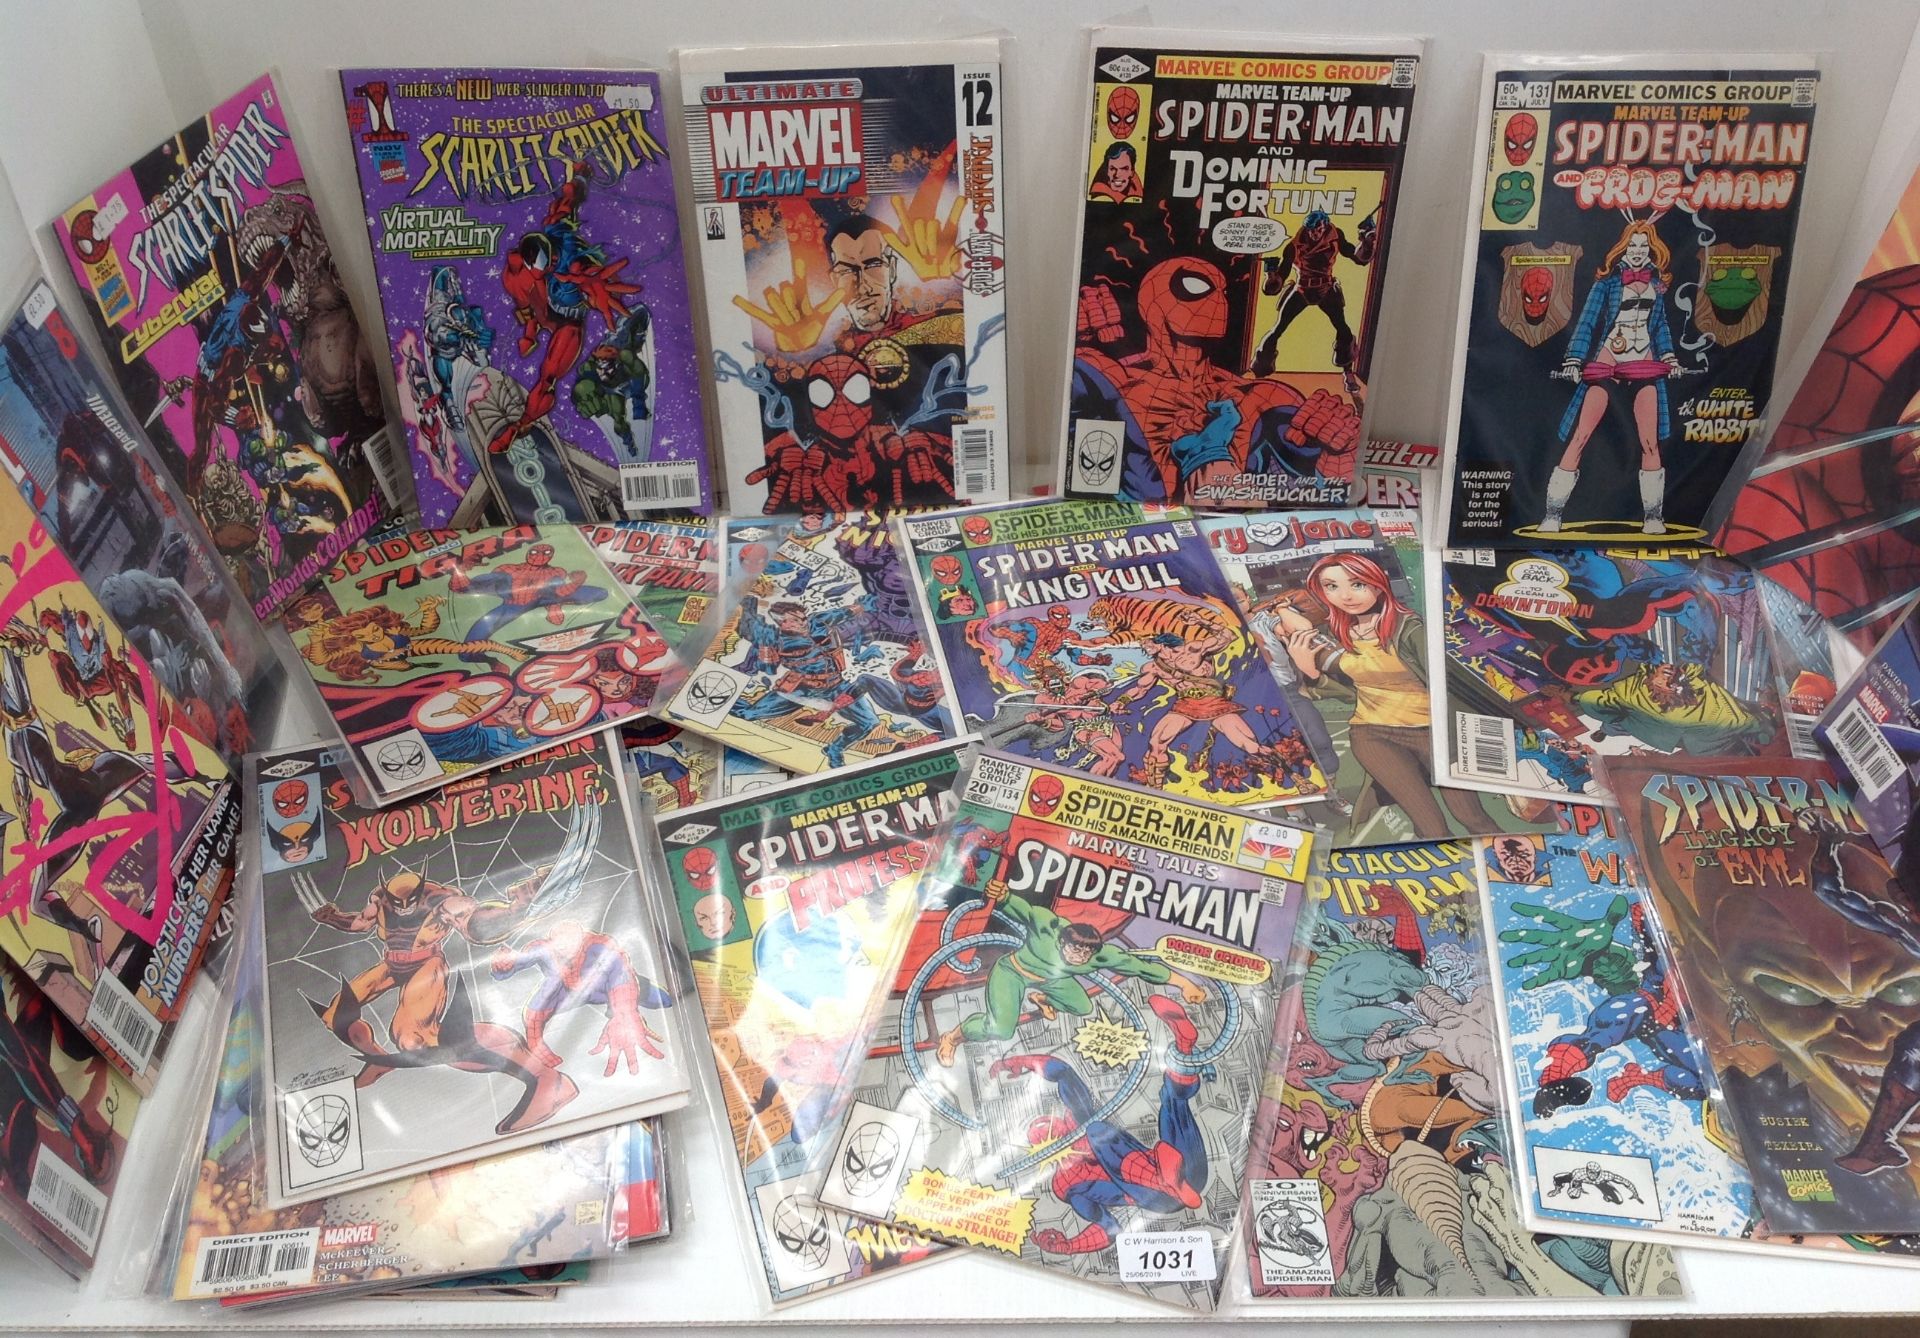 Forty mainly Marvel Comic Group and others mainly Spider-Man comic books - Spider-Man and Gargoyle,